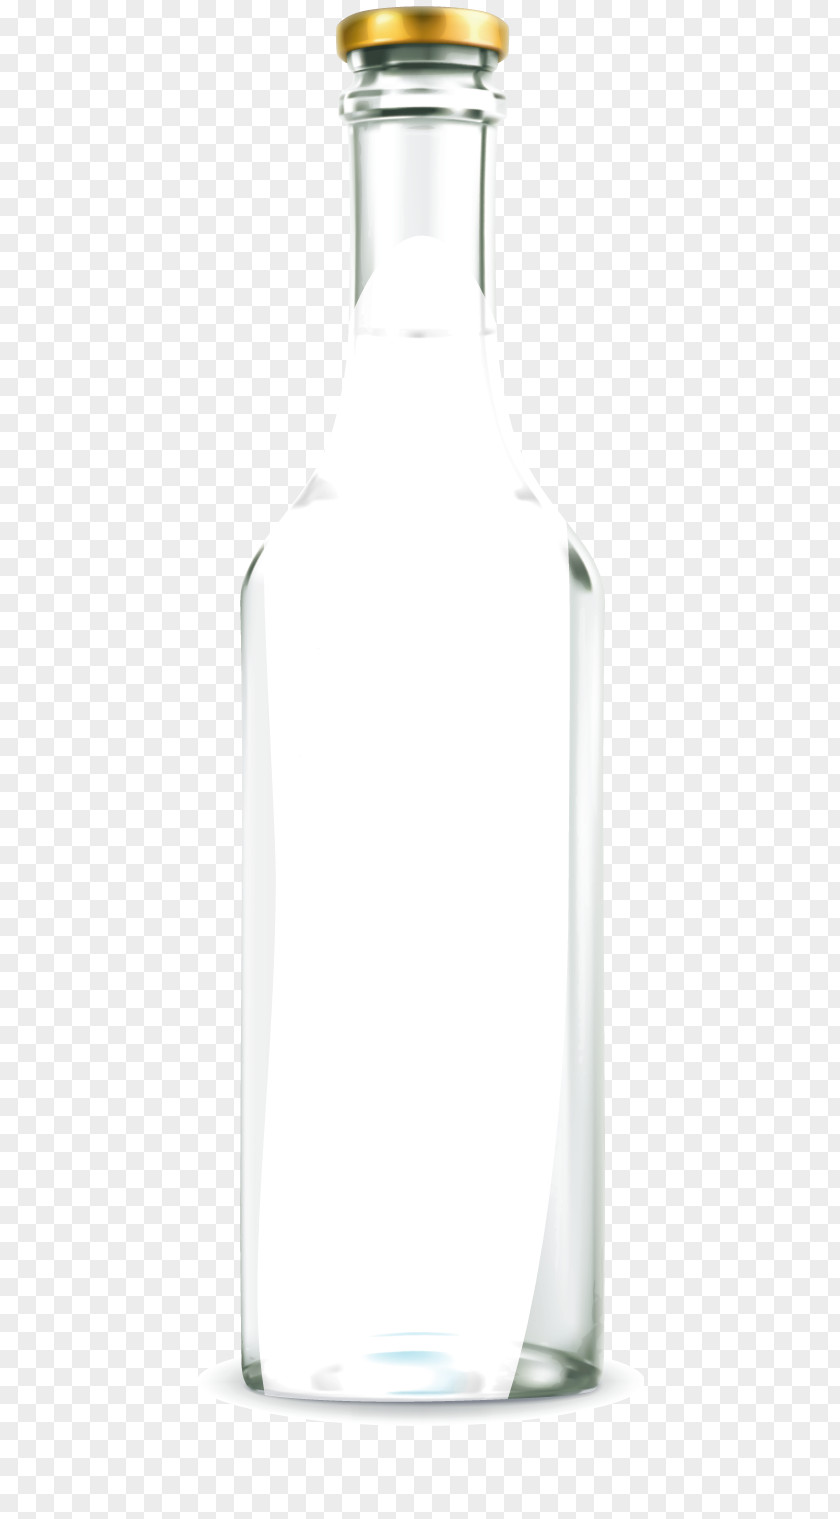 Vector Transparent Bottle Transparency And Translucency Glass PNG